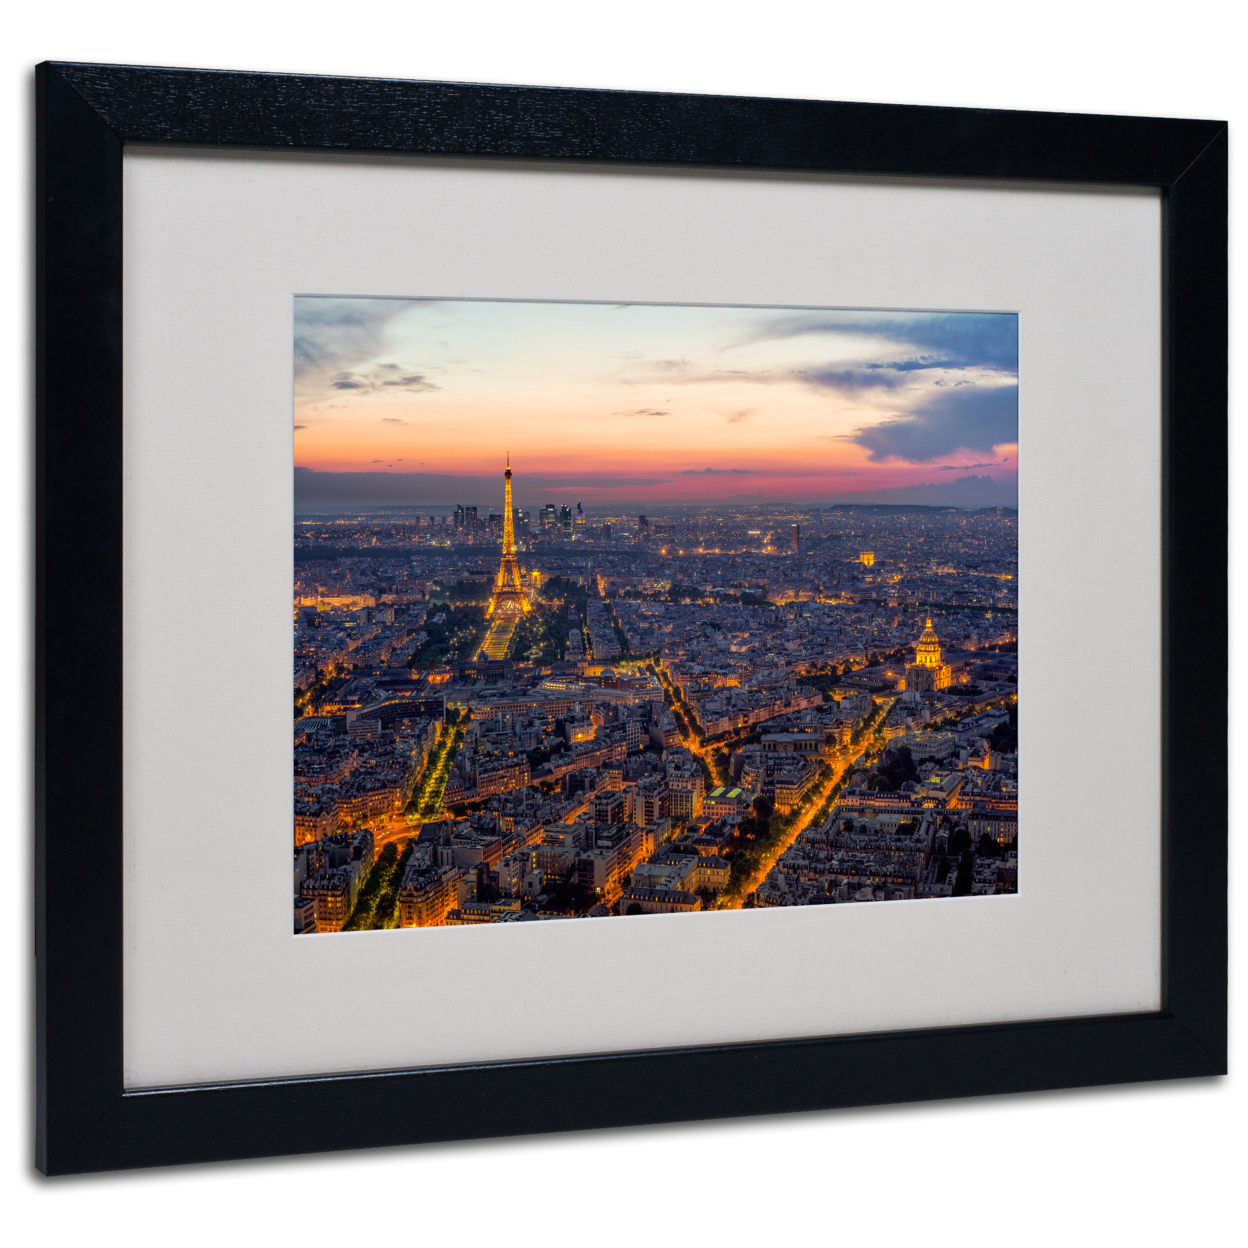 Mathieu Rivrin 'From The Roofs Of Paris' Black Wooden Framed Art 18 X 22 Inches